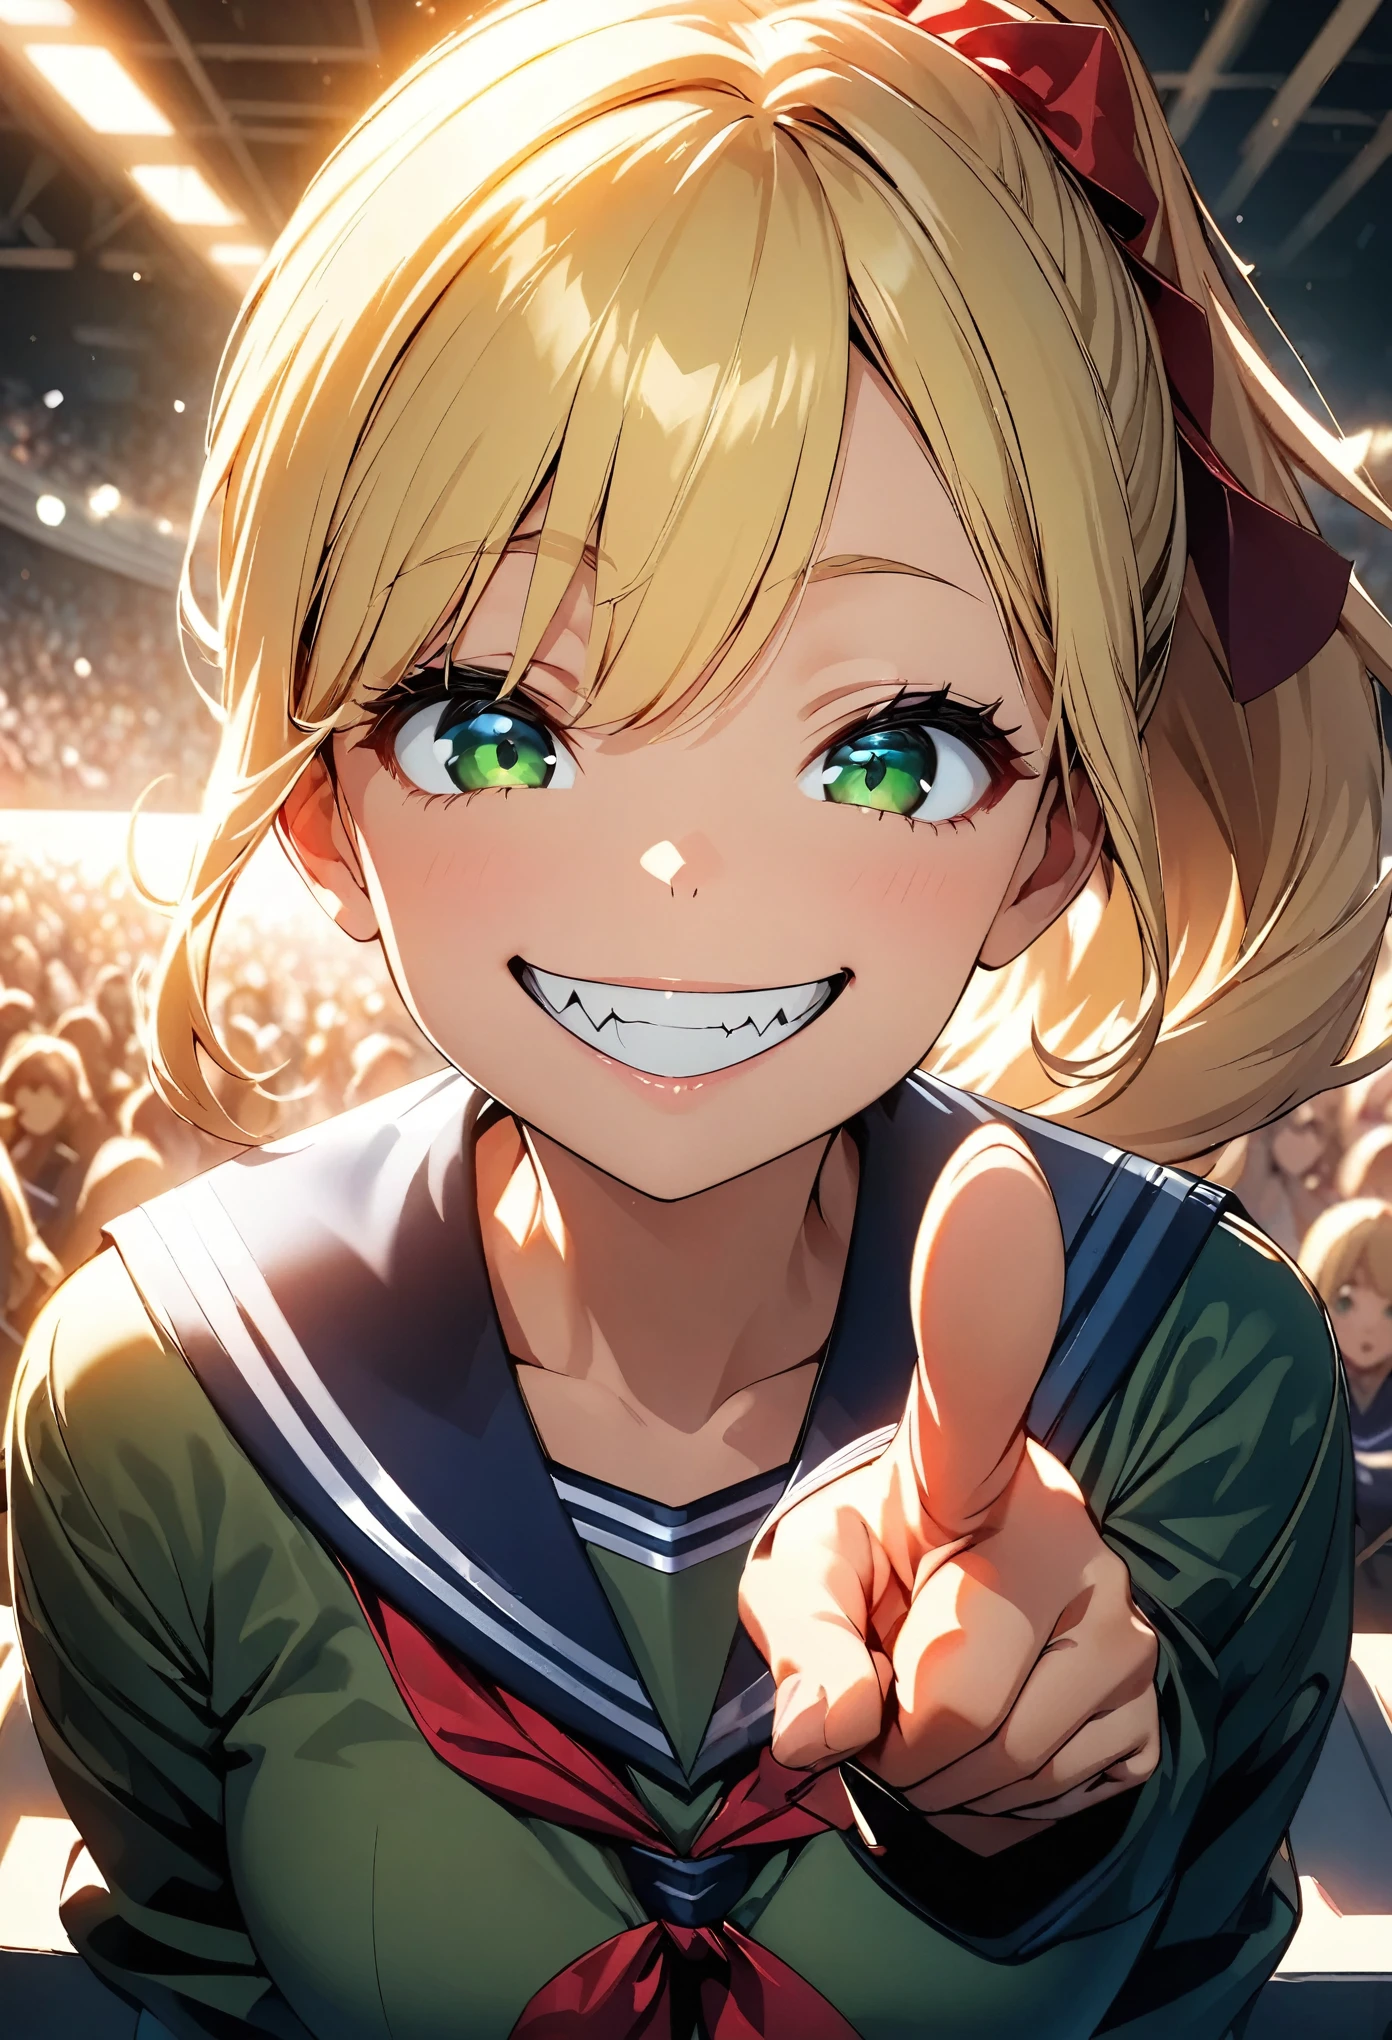 (highest quality:1.2, 4K, 8k, Studio Anime, Very detailed, up to date, Vibrant, High detail, High Contrast, masterpiece:1.2, highest quality, Best aesthetics), (((1 girl))), jk, , illustration texture, Bright colors, Soft lighting, blonde, ponytail, Red ribbon, ((Beautiful fine details, Slanted Eyes, Green Eyes)), Beautiful lip detail, playful look, ((Sailor suit:1.2, White and dark green uniform)), ((Pointing at the audience:1.4)), (crazy smile:1.4), A competitive yet friendly atmosphere, Striking contrast,